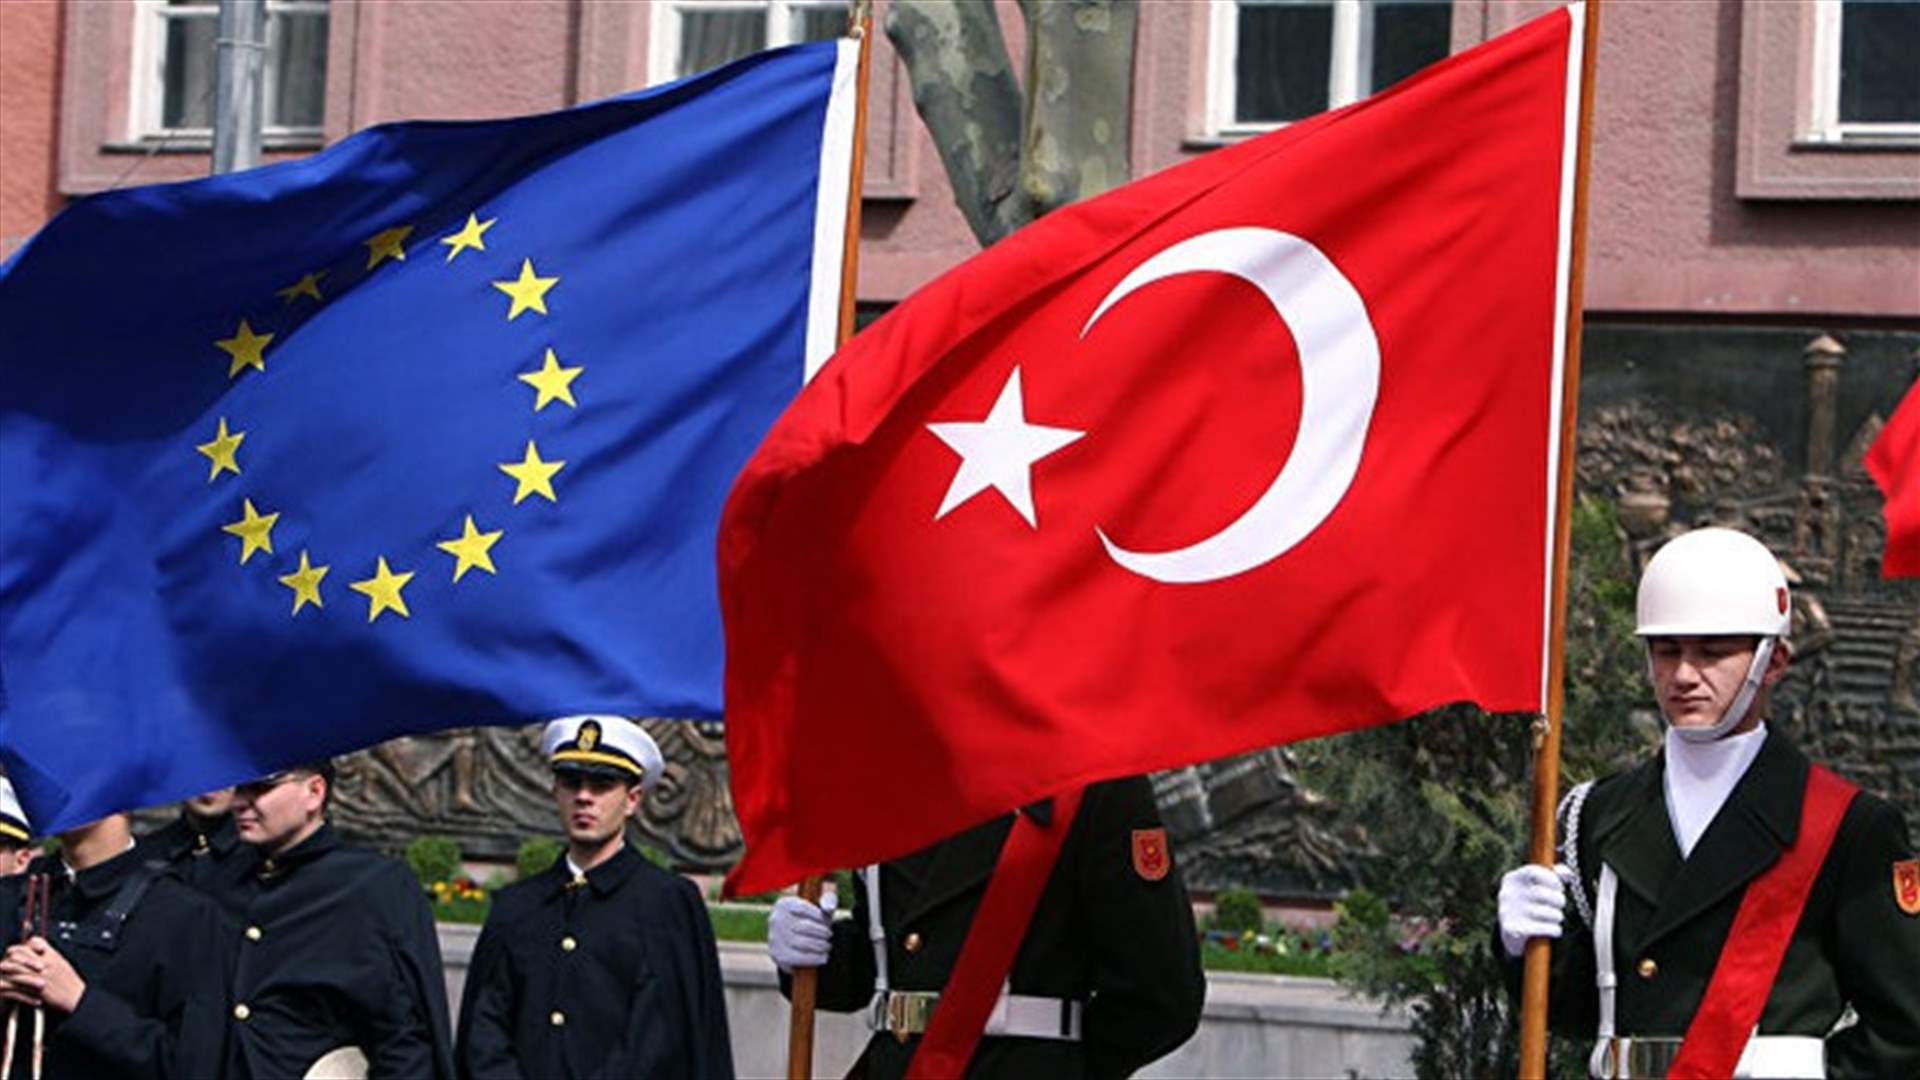 Turkey says EU exercising democracy selectively, wrong to stand by Netherlands